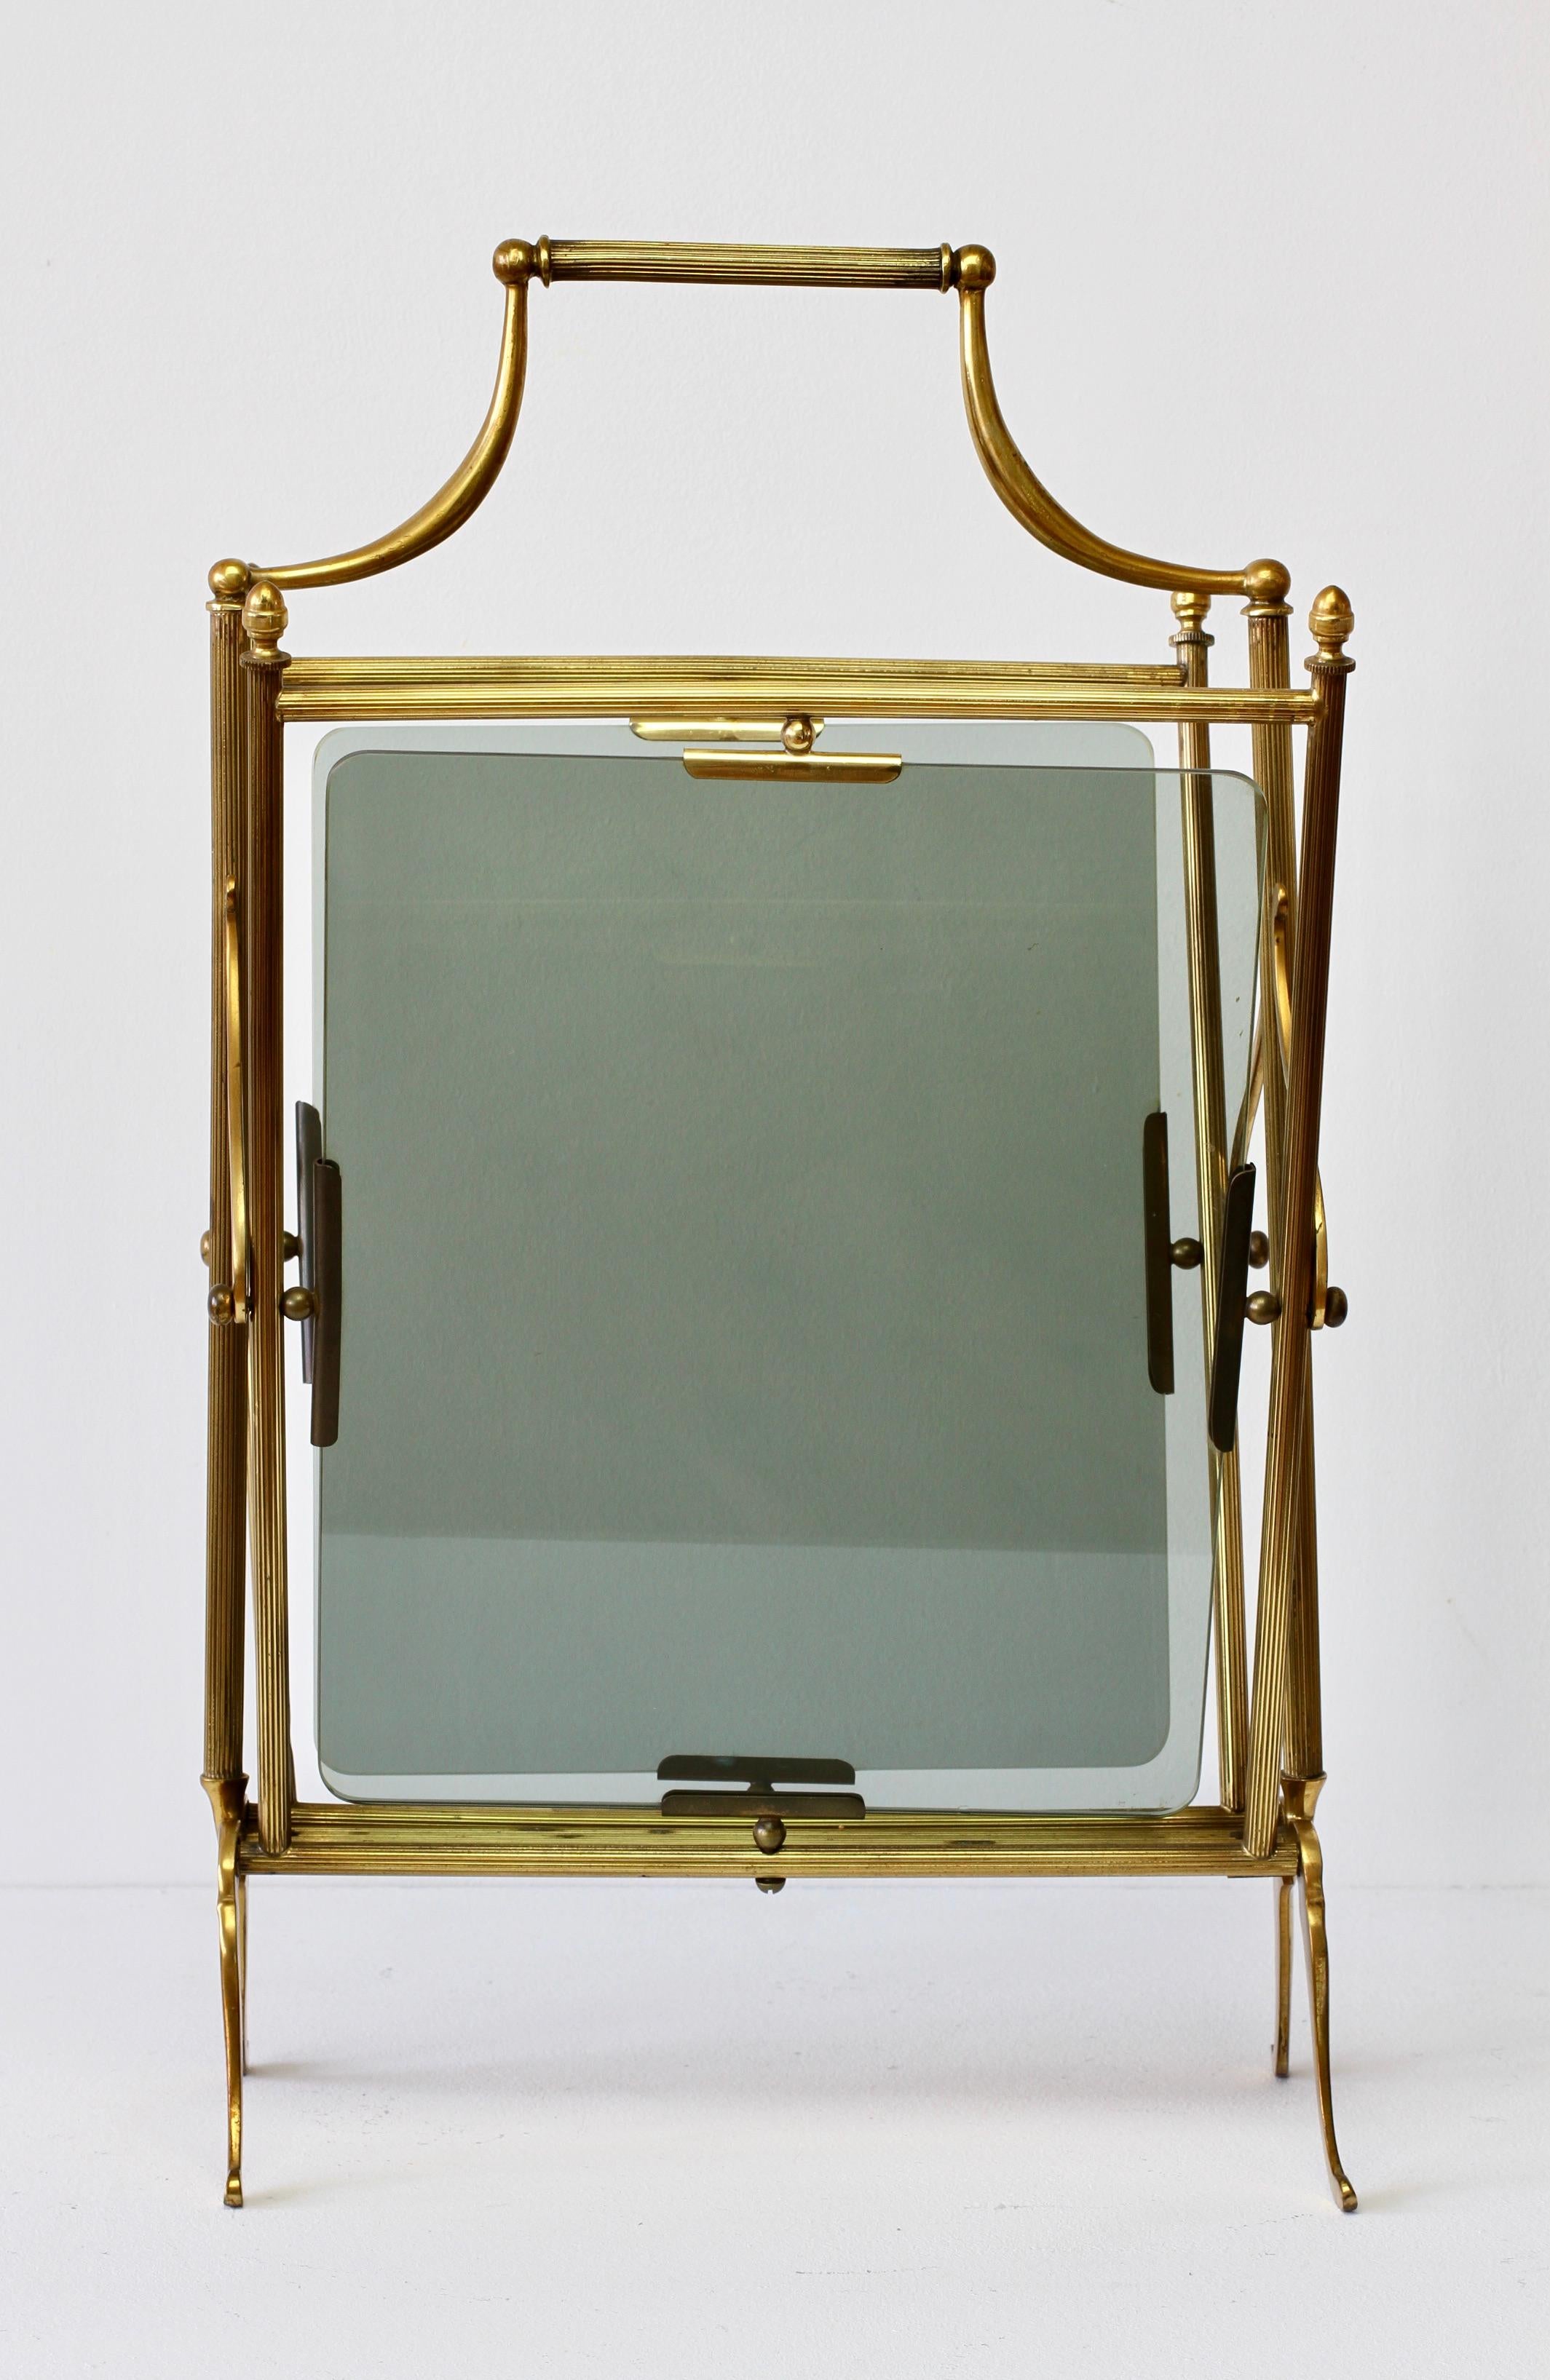 Cast Maison Baguès ‘Attributed' Brass & Toned Glass Magazine Rack / Newspaper Stand For Sale